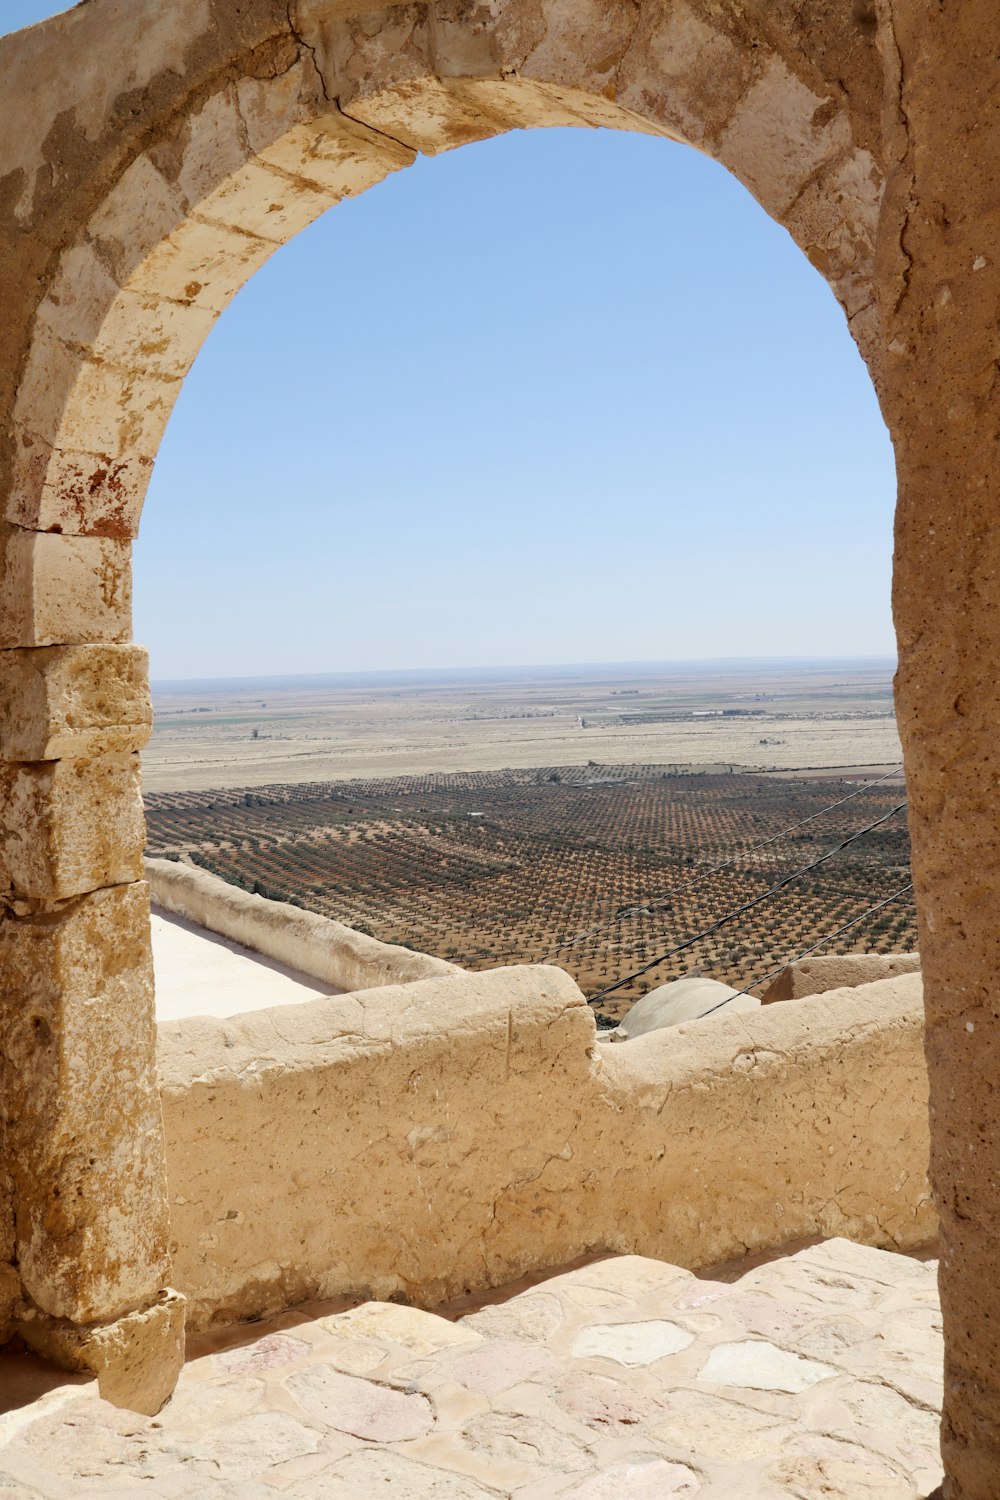 a stone arch with a view of a desert